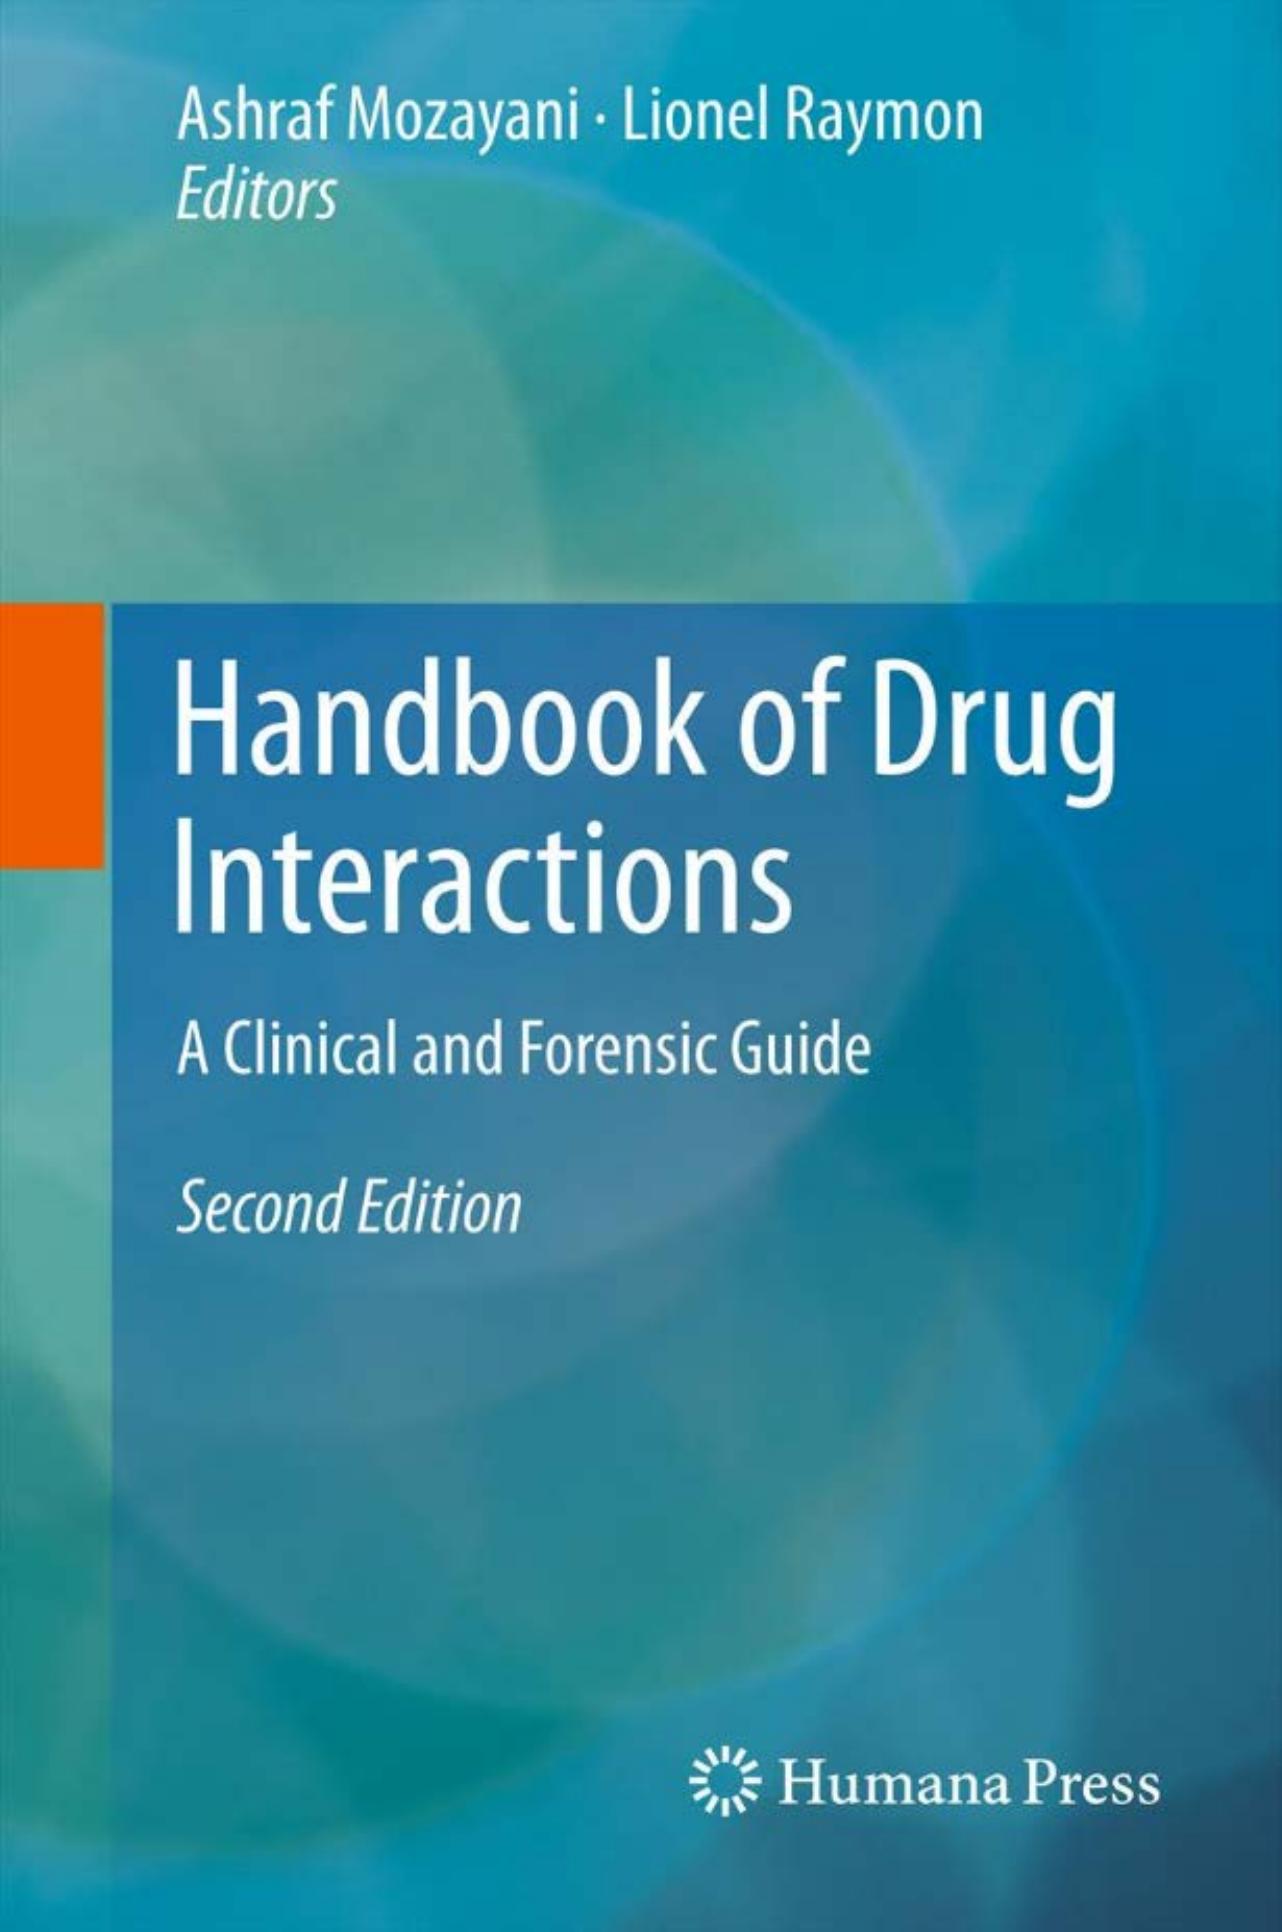 Handbook of Drug Interactions: A Clinical and Forensic Guide, 2nd Edition